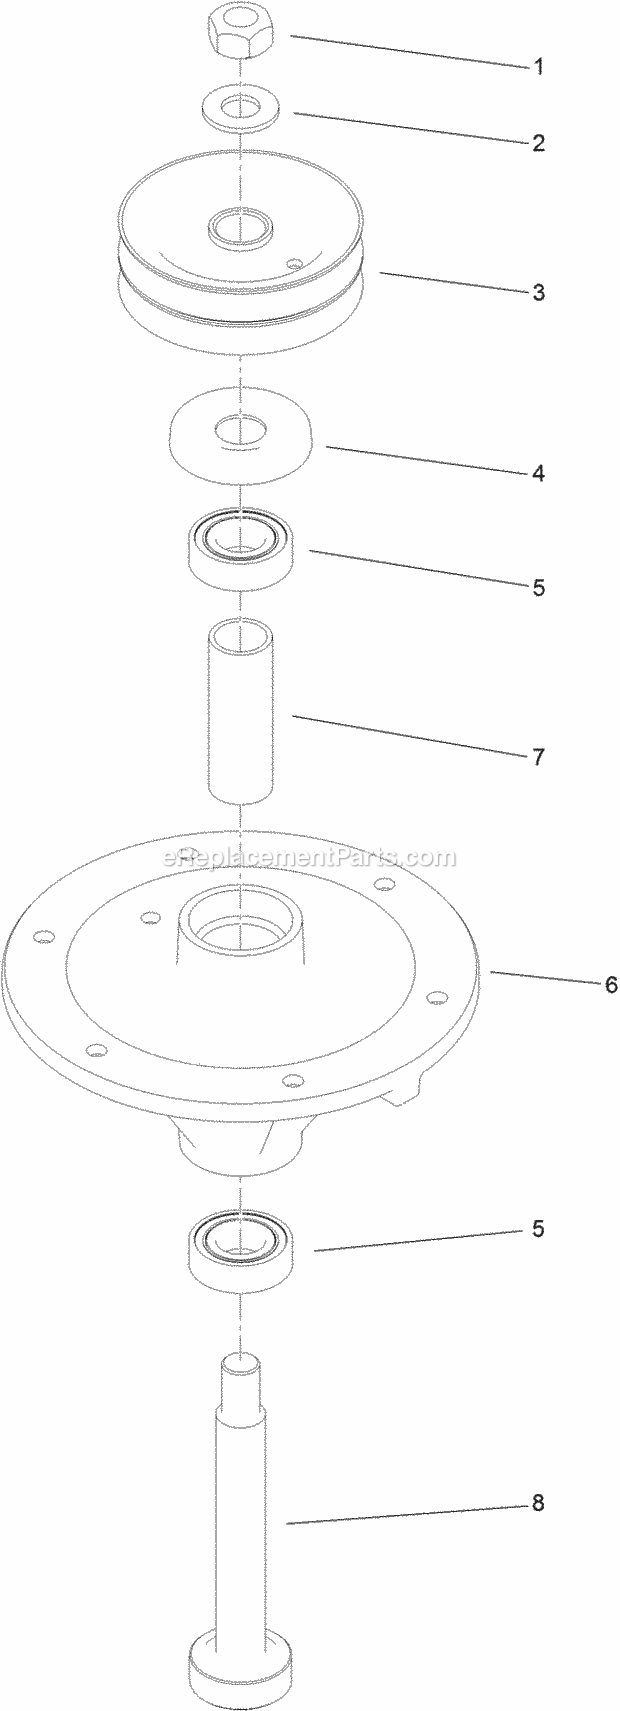 Toro 74536 (314000001-314999999) Grandstand Mower, With 40in Turbo Force Cutting Unit, 2014 Spindle Assembly No. 117-7636 Diagram